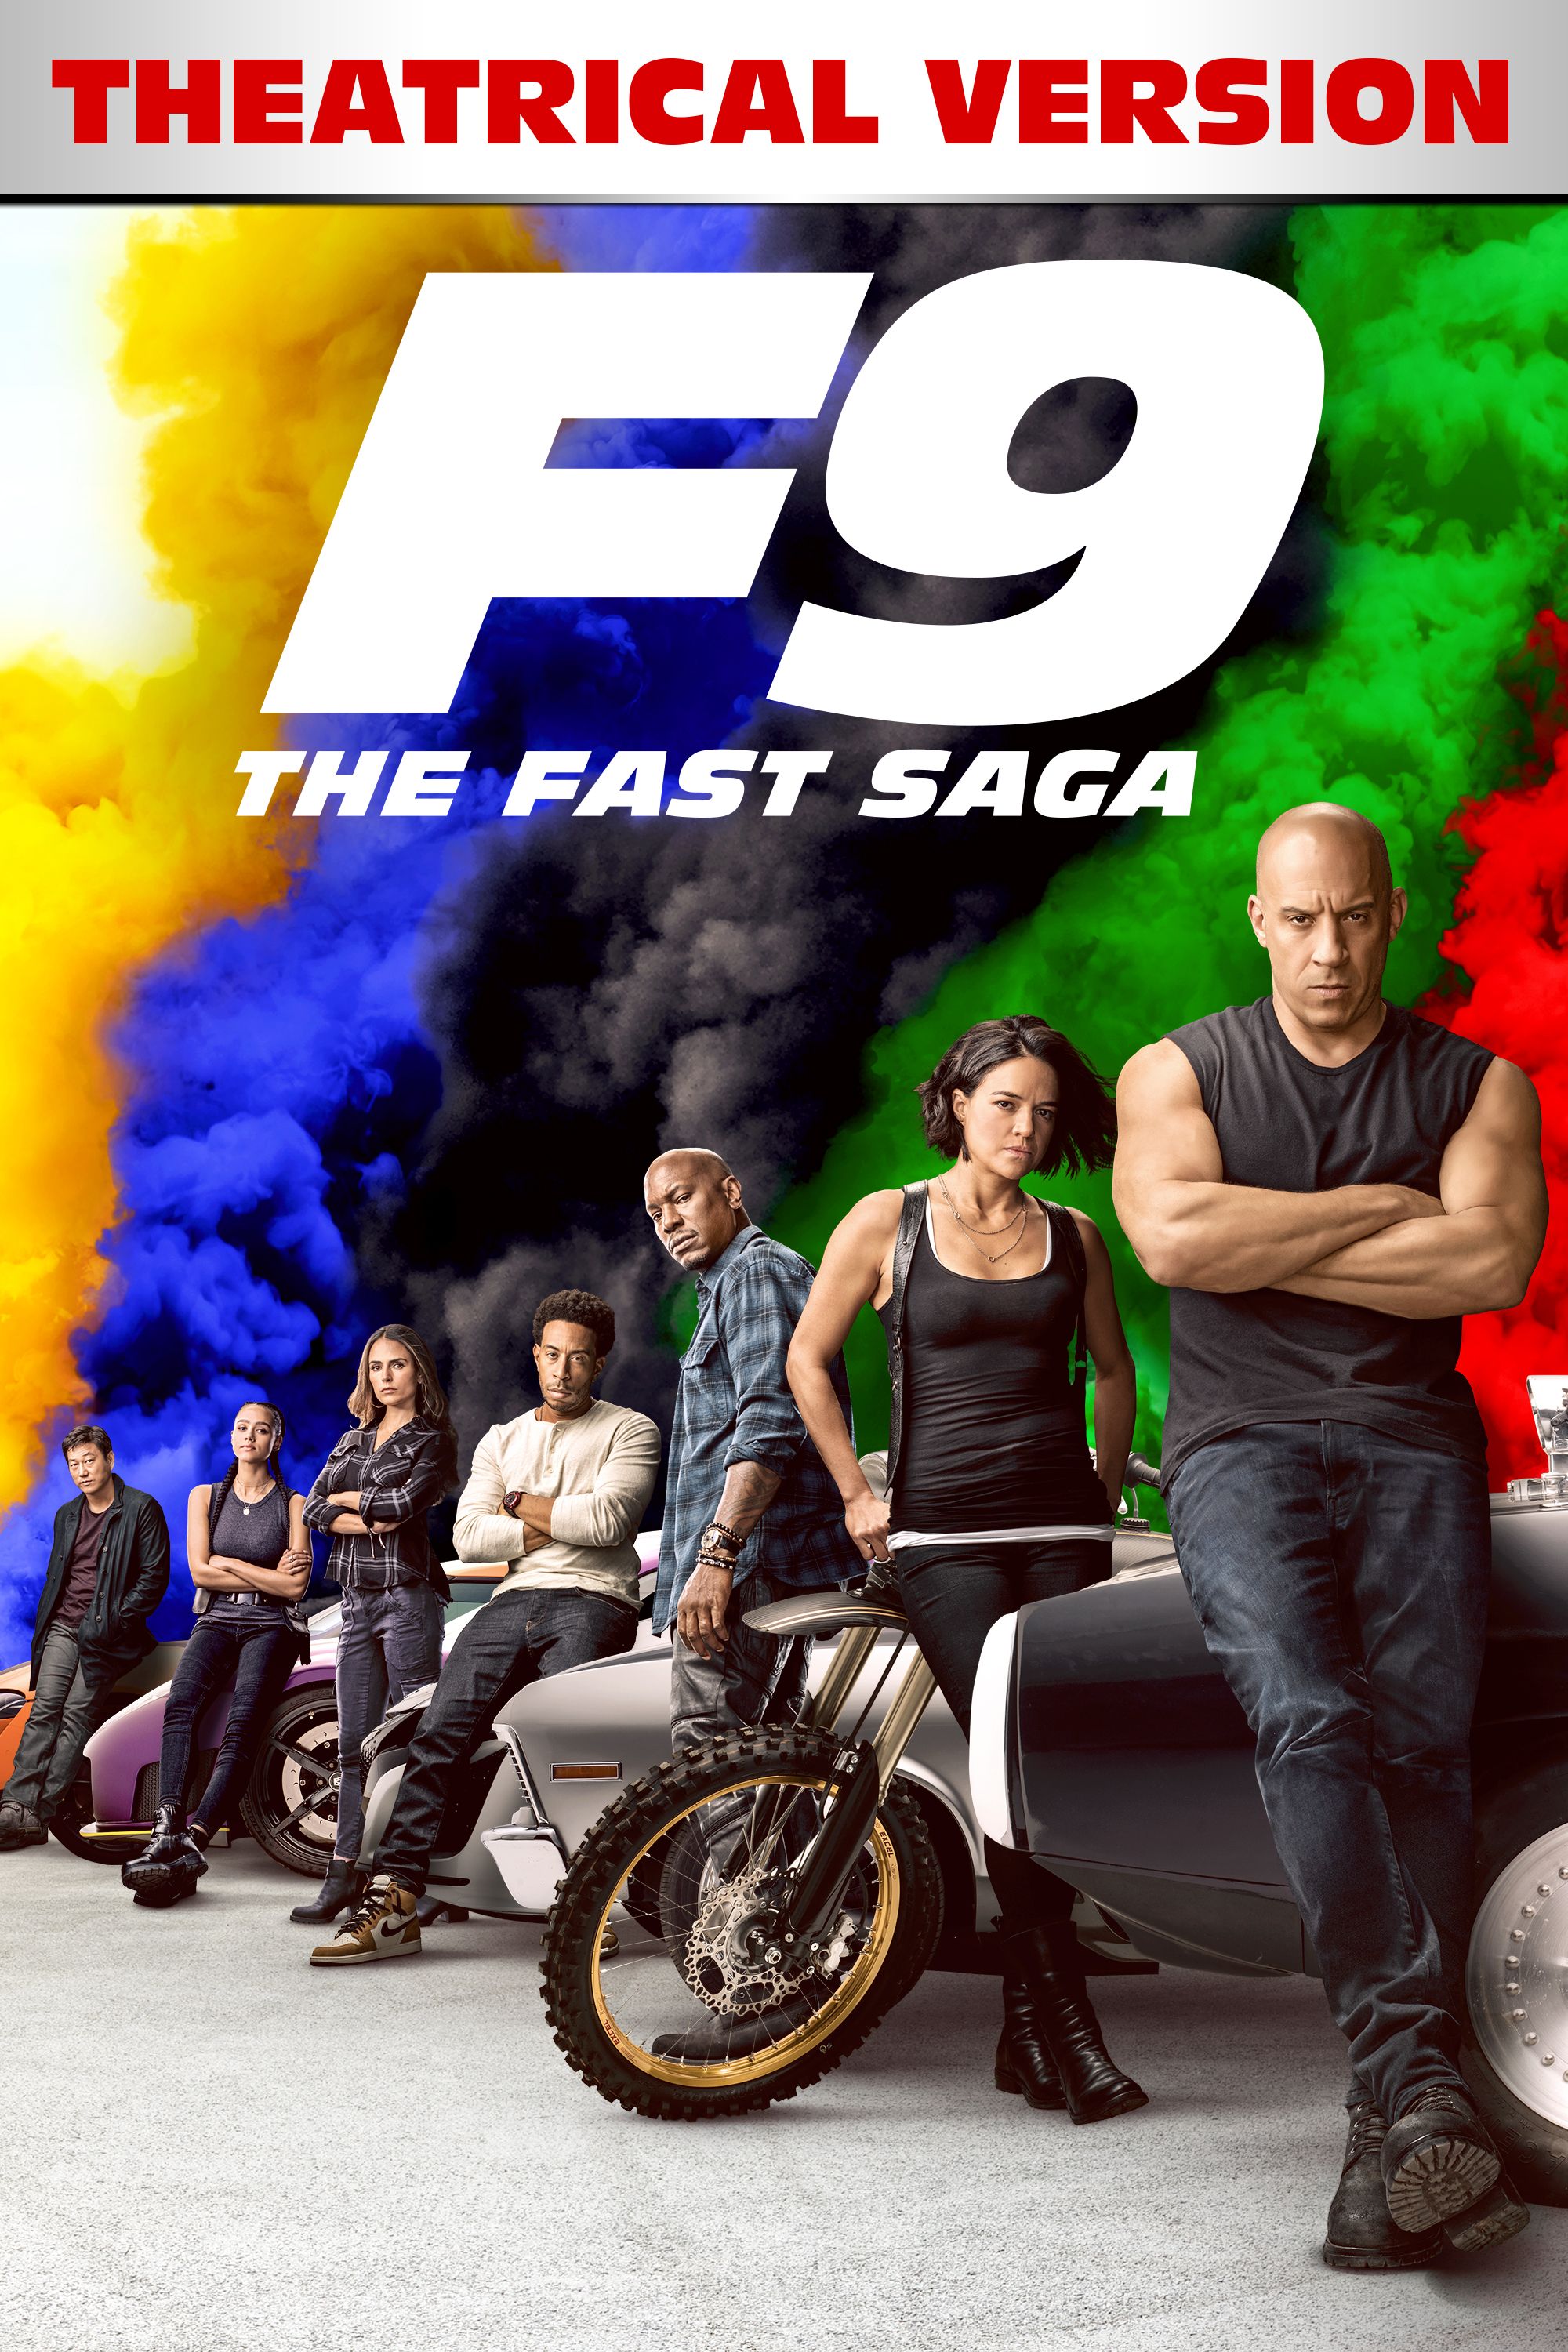 Download fast and furious 9 full movie